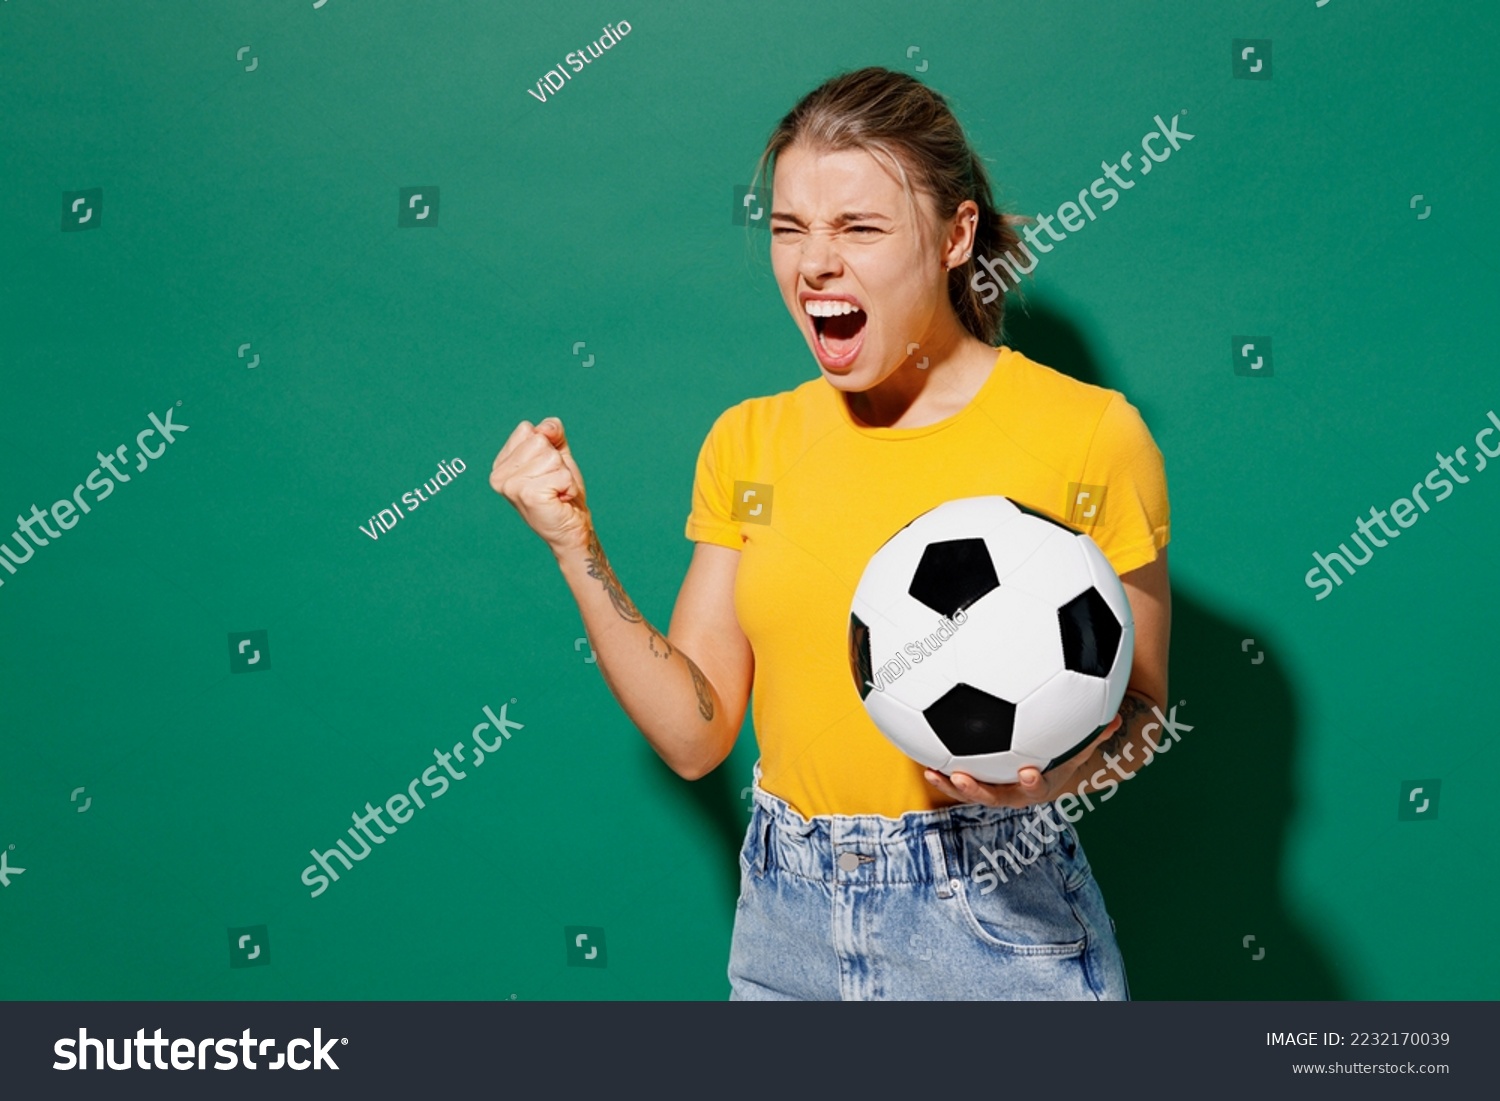 Young angry ardore woman fan wearing basic yellow t-shirt cheer up support football sport team hold in hand soccer ball watch tv live stream scream clench fist isolated on dark green background studio #2232170039